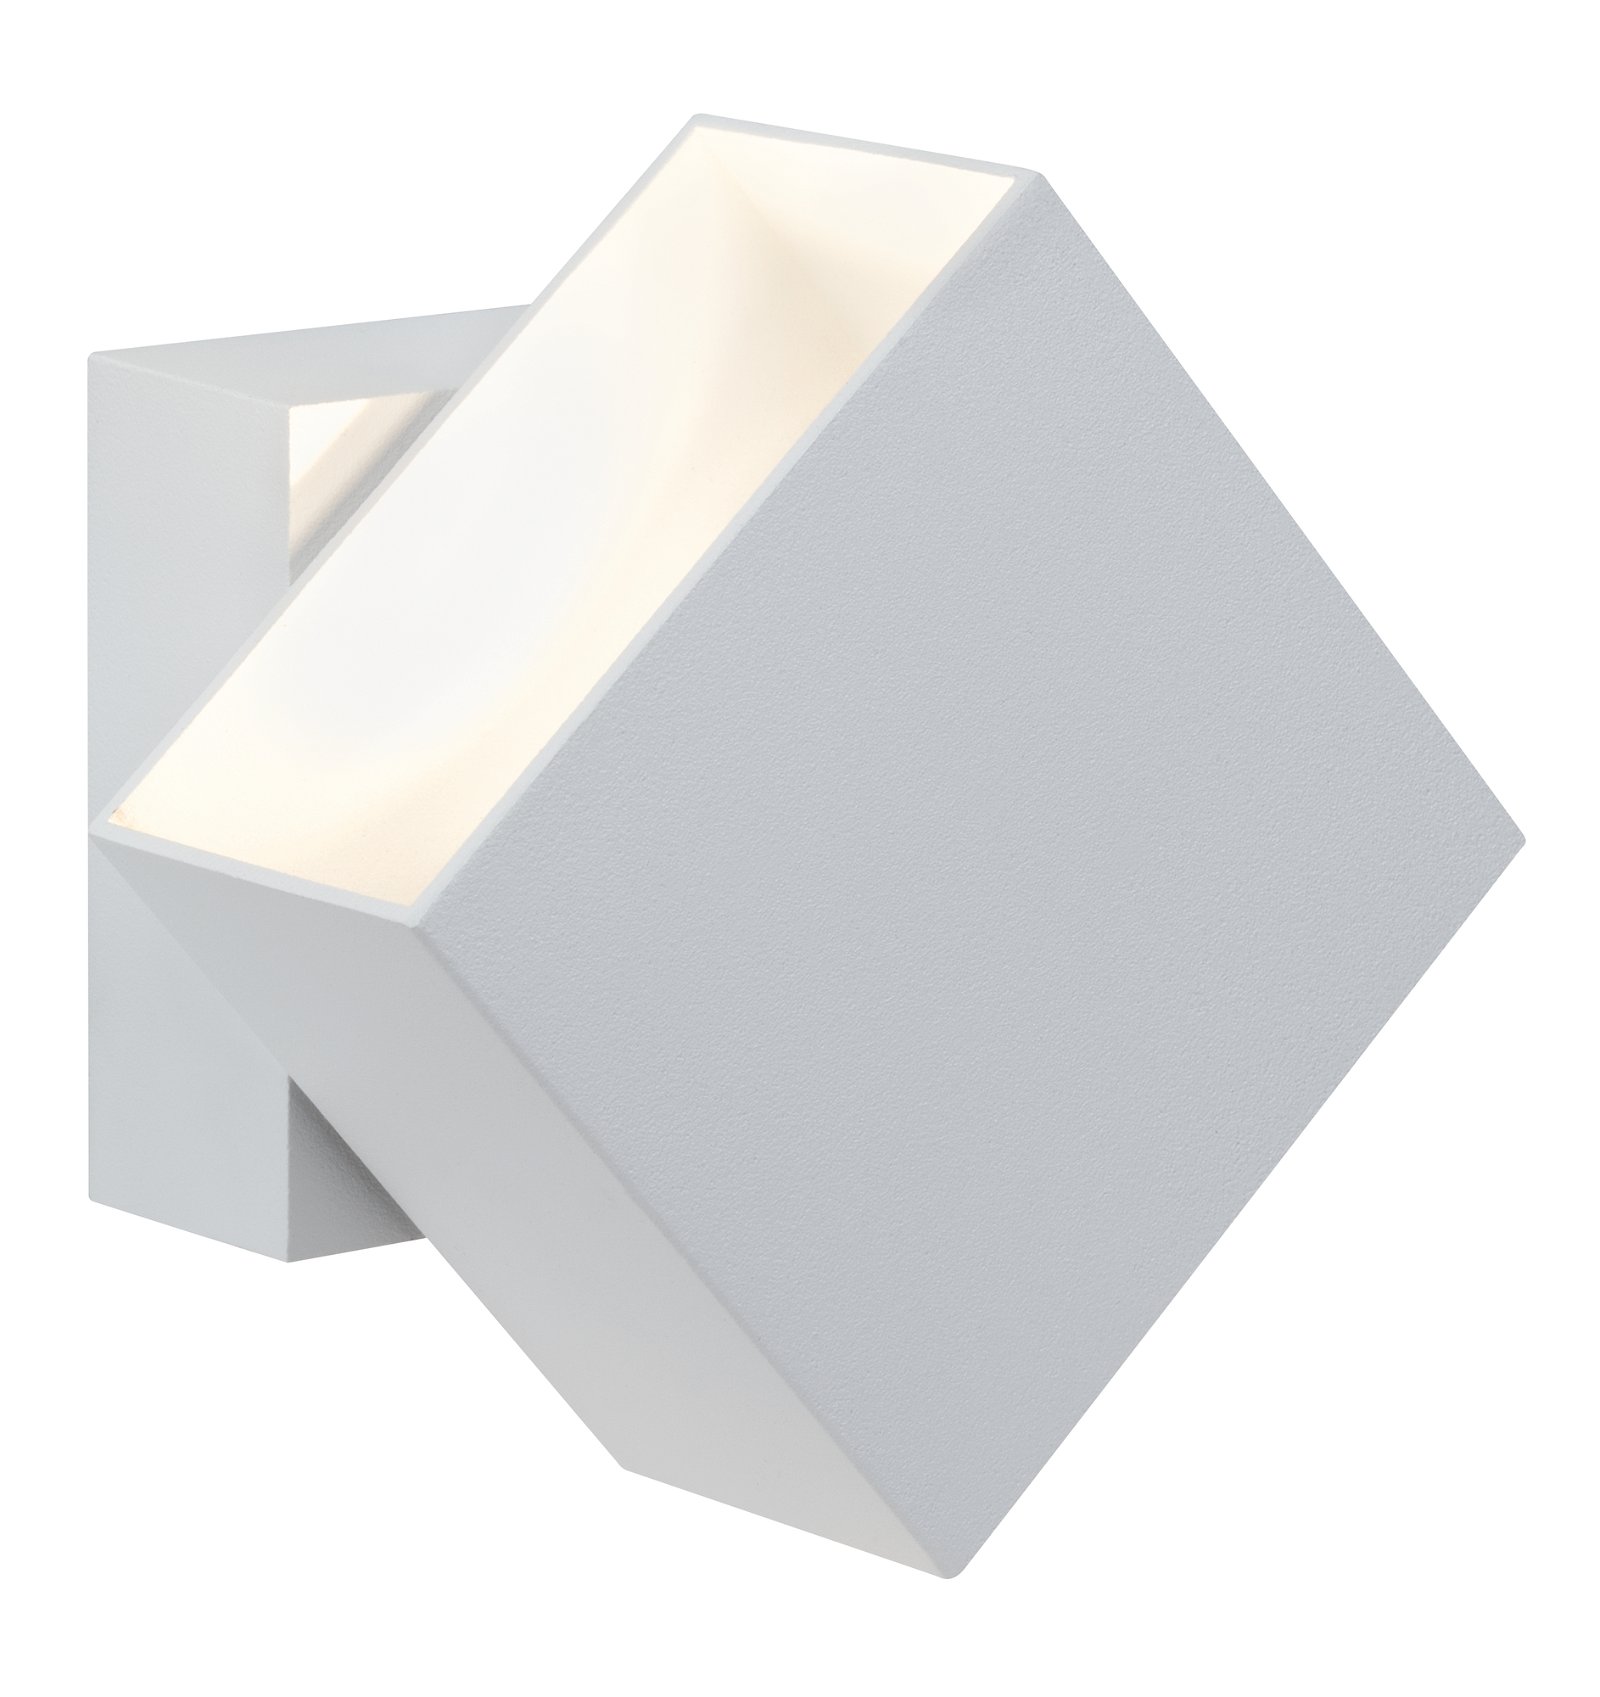 House LED 2x3,5W 355lm 230V Cybo luminaire 100x100mm square / Exterior White wall 355lm IP65 2700K